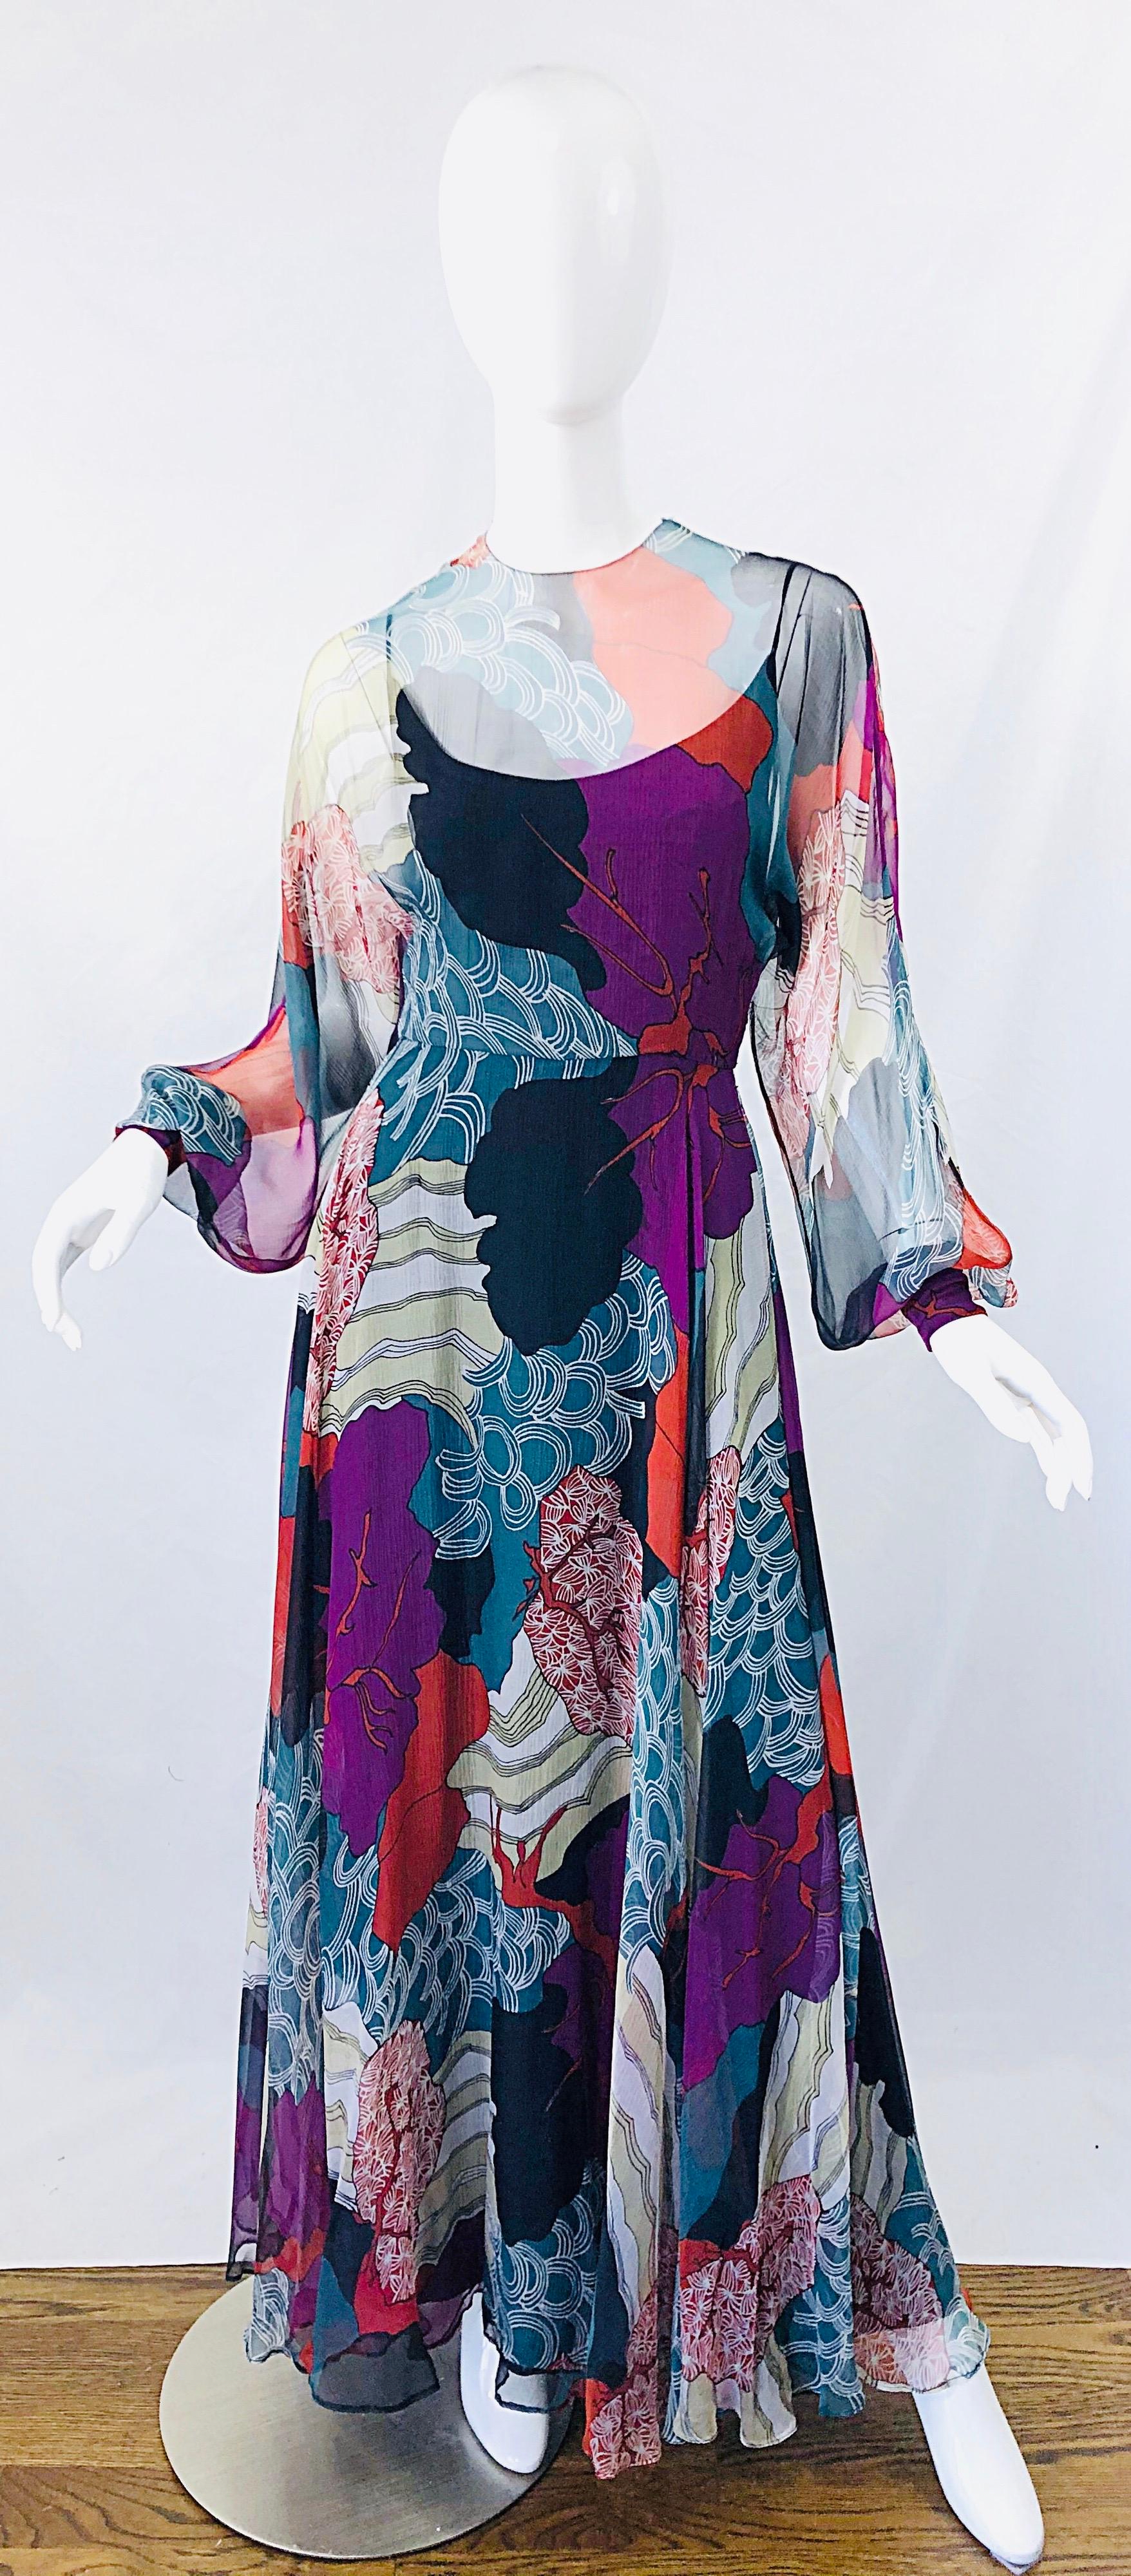 Absolutley stunning rare 1970s vintage CHRISTIAN DIOR by MARC BOHAN hiroshige wave novelty print silk chiffon evening gown maxi dress ! Features a beautiful print in vibrant colors of blue, teal, ivory and pops of orange throughout. Features semi